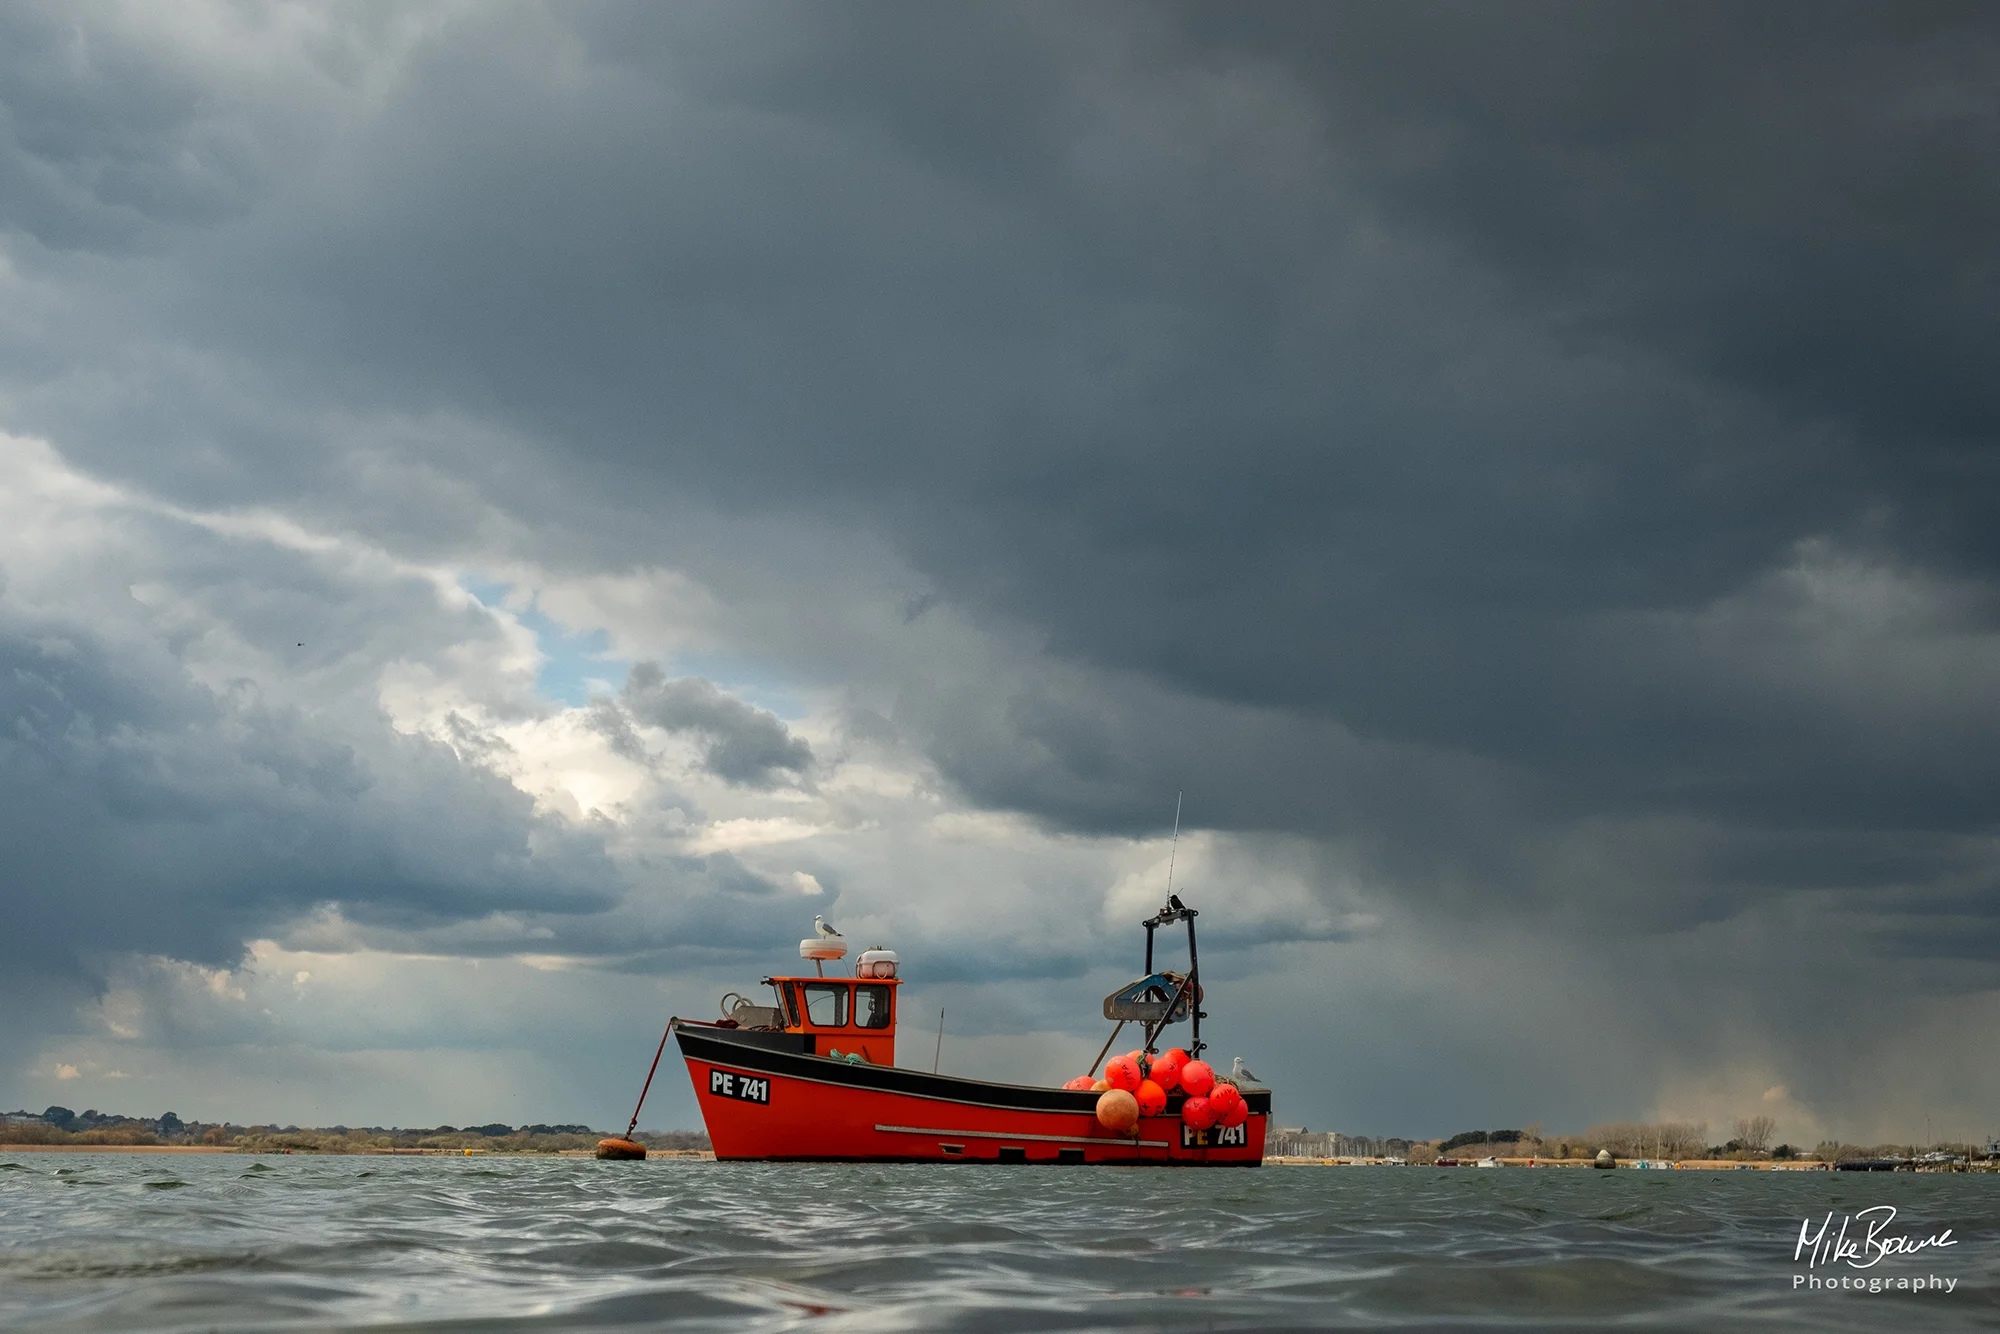 Orange fishing boat on calm water on a cloudy day